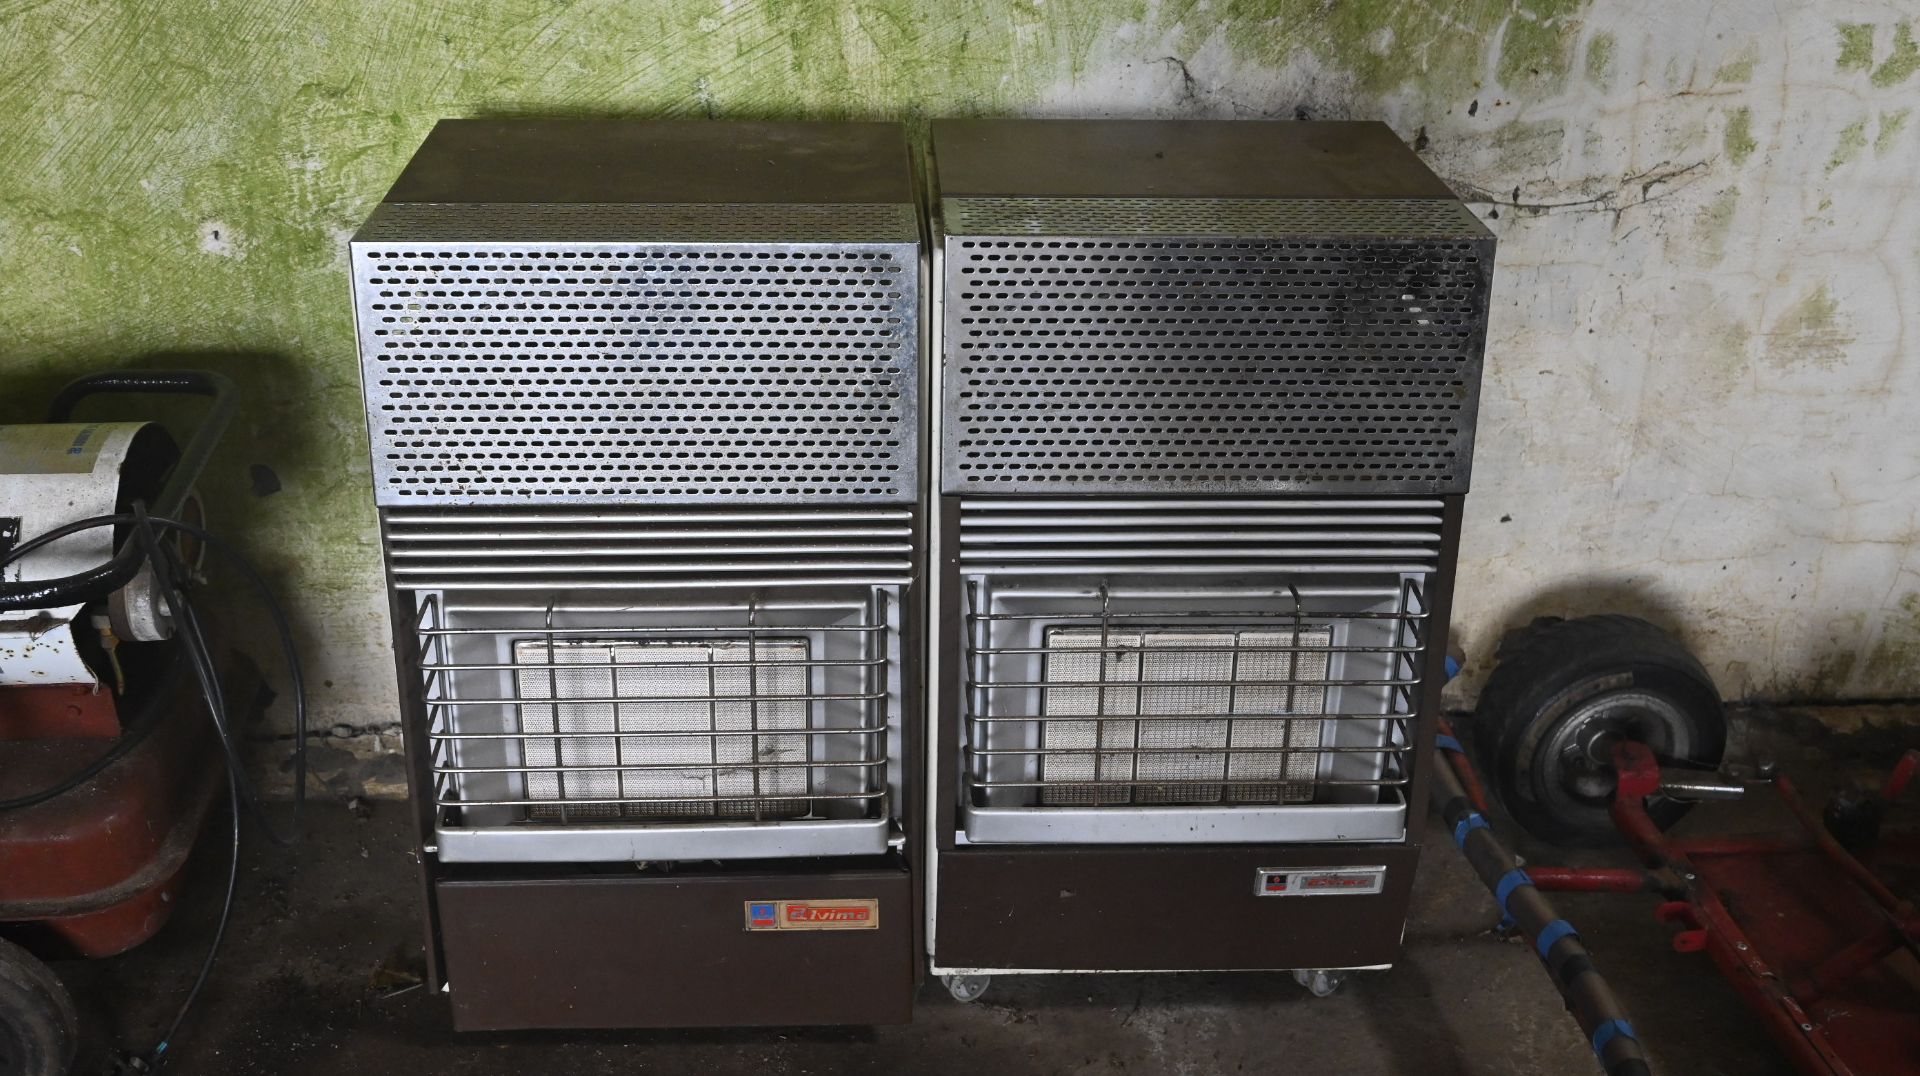 Two gas workshop heaters